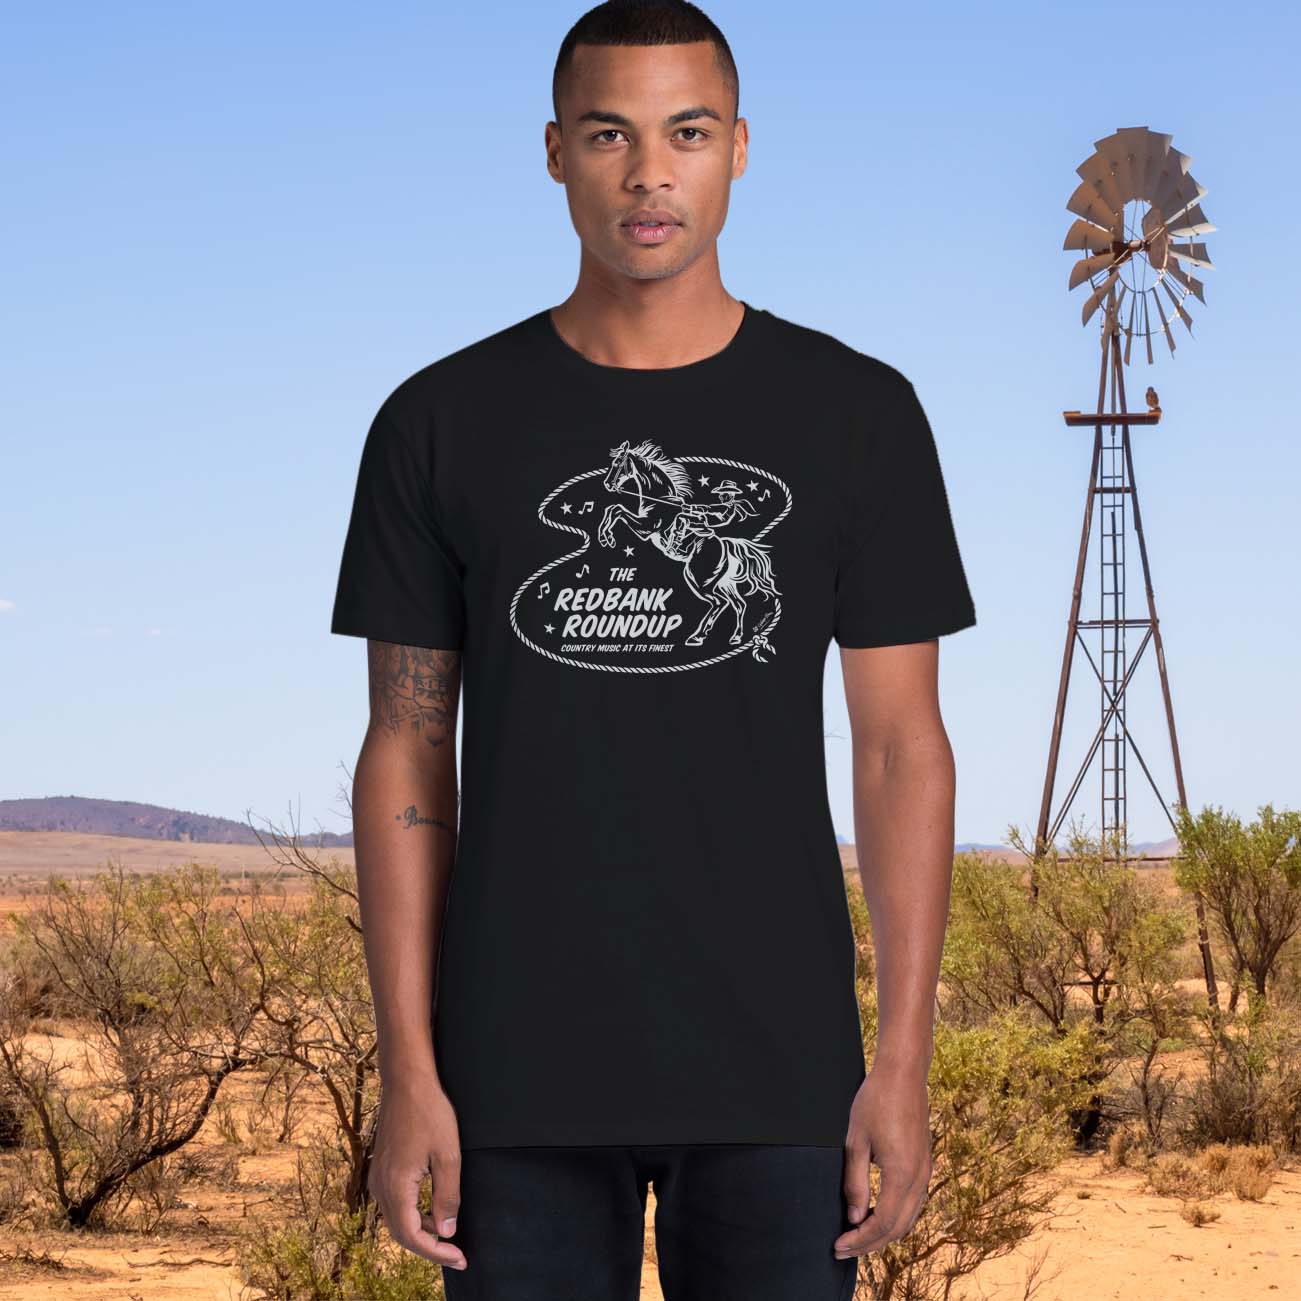 Black unisex t-shirt with a cowboy riding a bucking bronco. Text says "The Red Bank Roundup - country music at its finest" A lasso, stars and music notes surround the design.